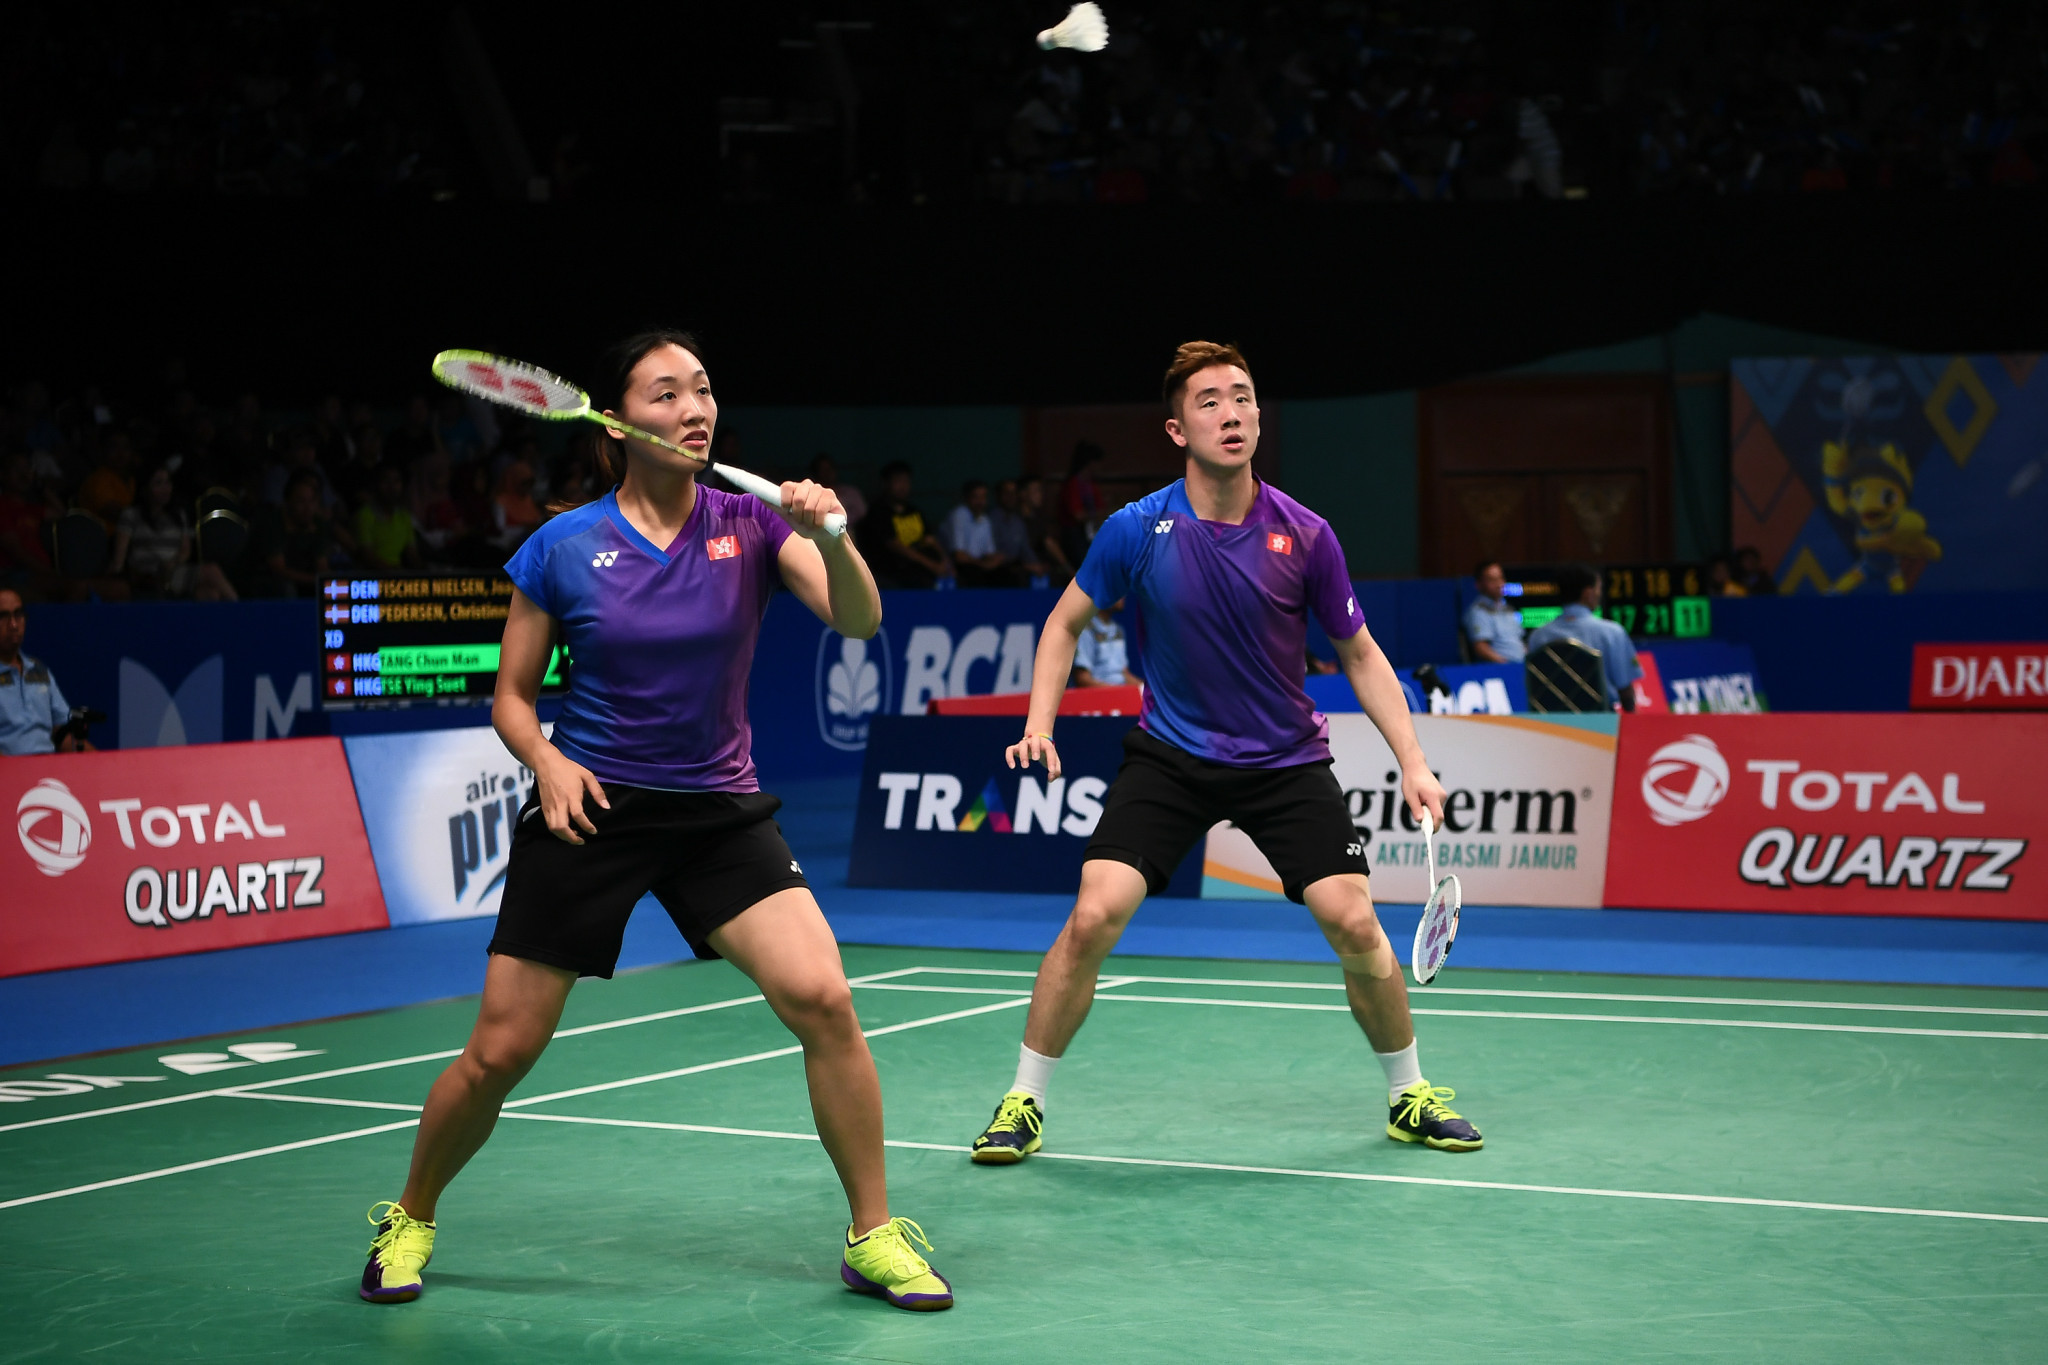 Tse Ying Suet, left, and Tang Chun Man of Hong Kong caused a shock in the semi-finals of the BWF Super Series Finals by beating Chinese pair Wang Yilu and Huang Dongping ©Getty Images